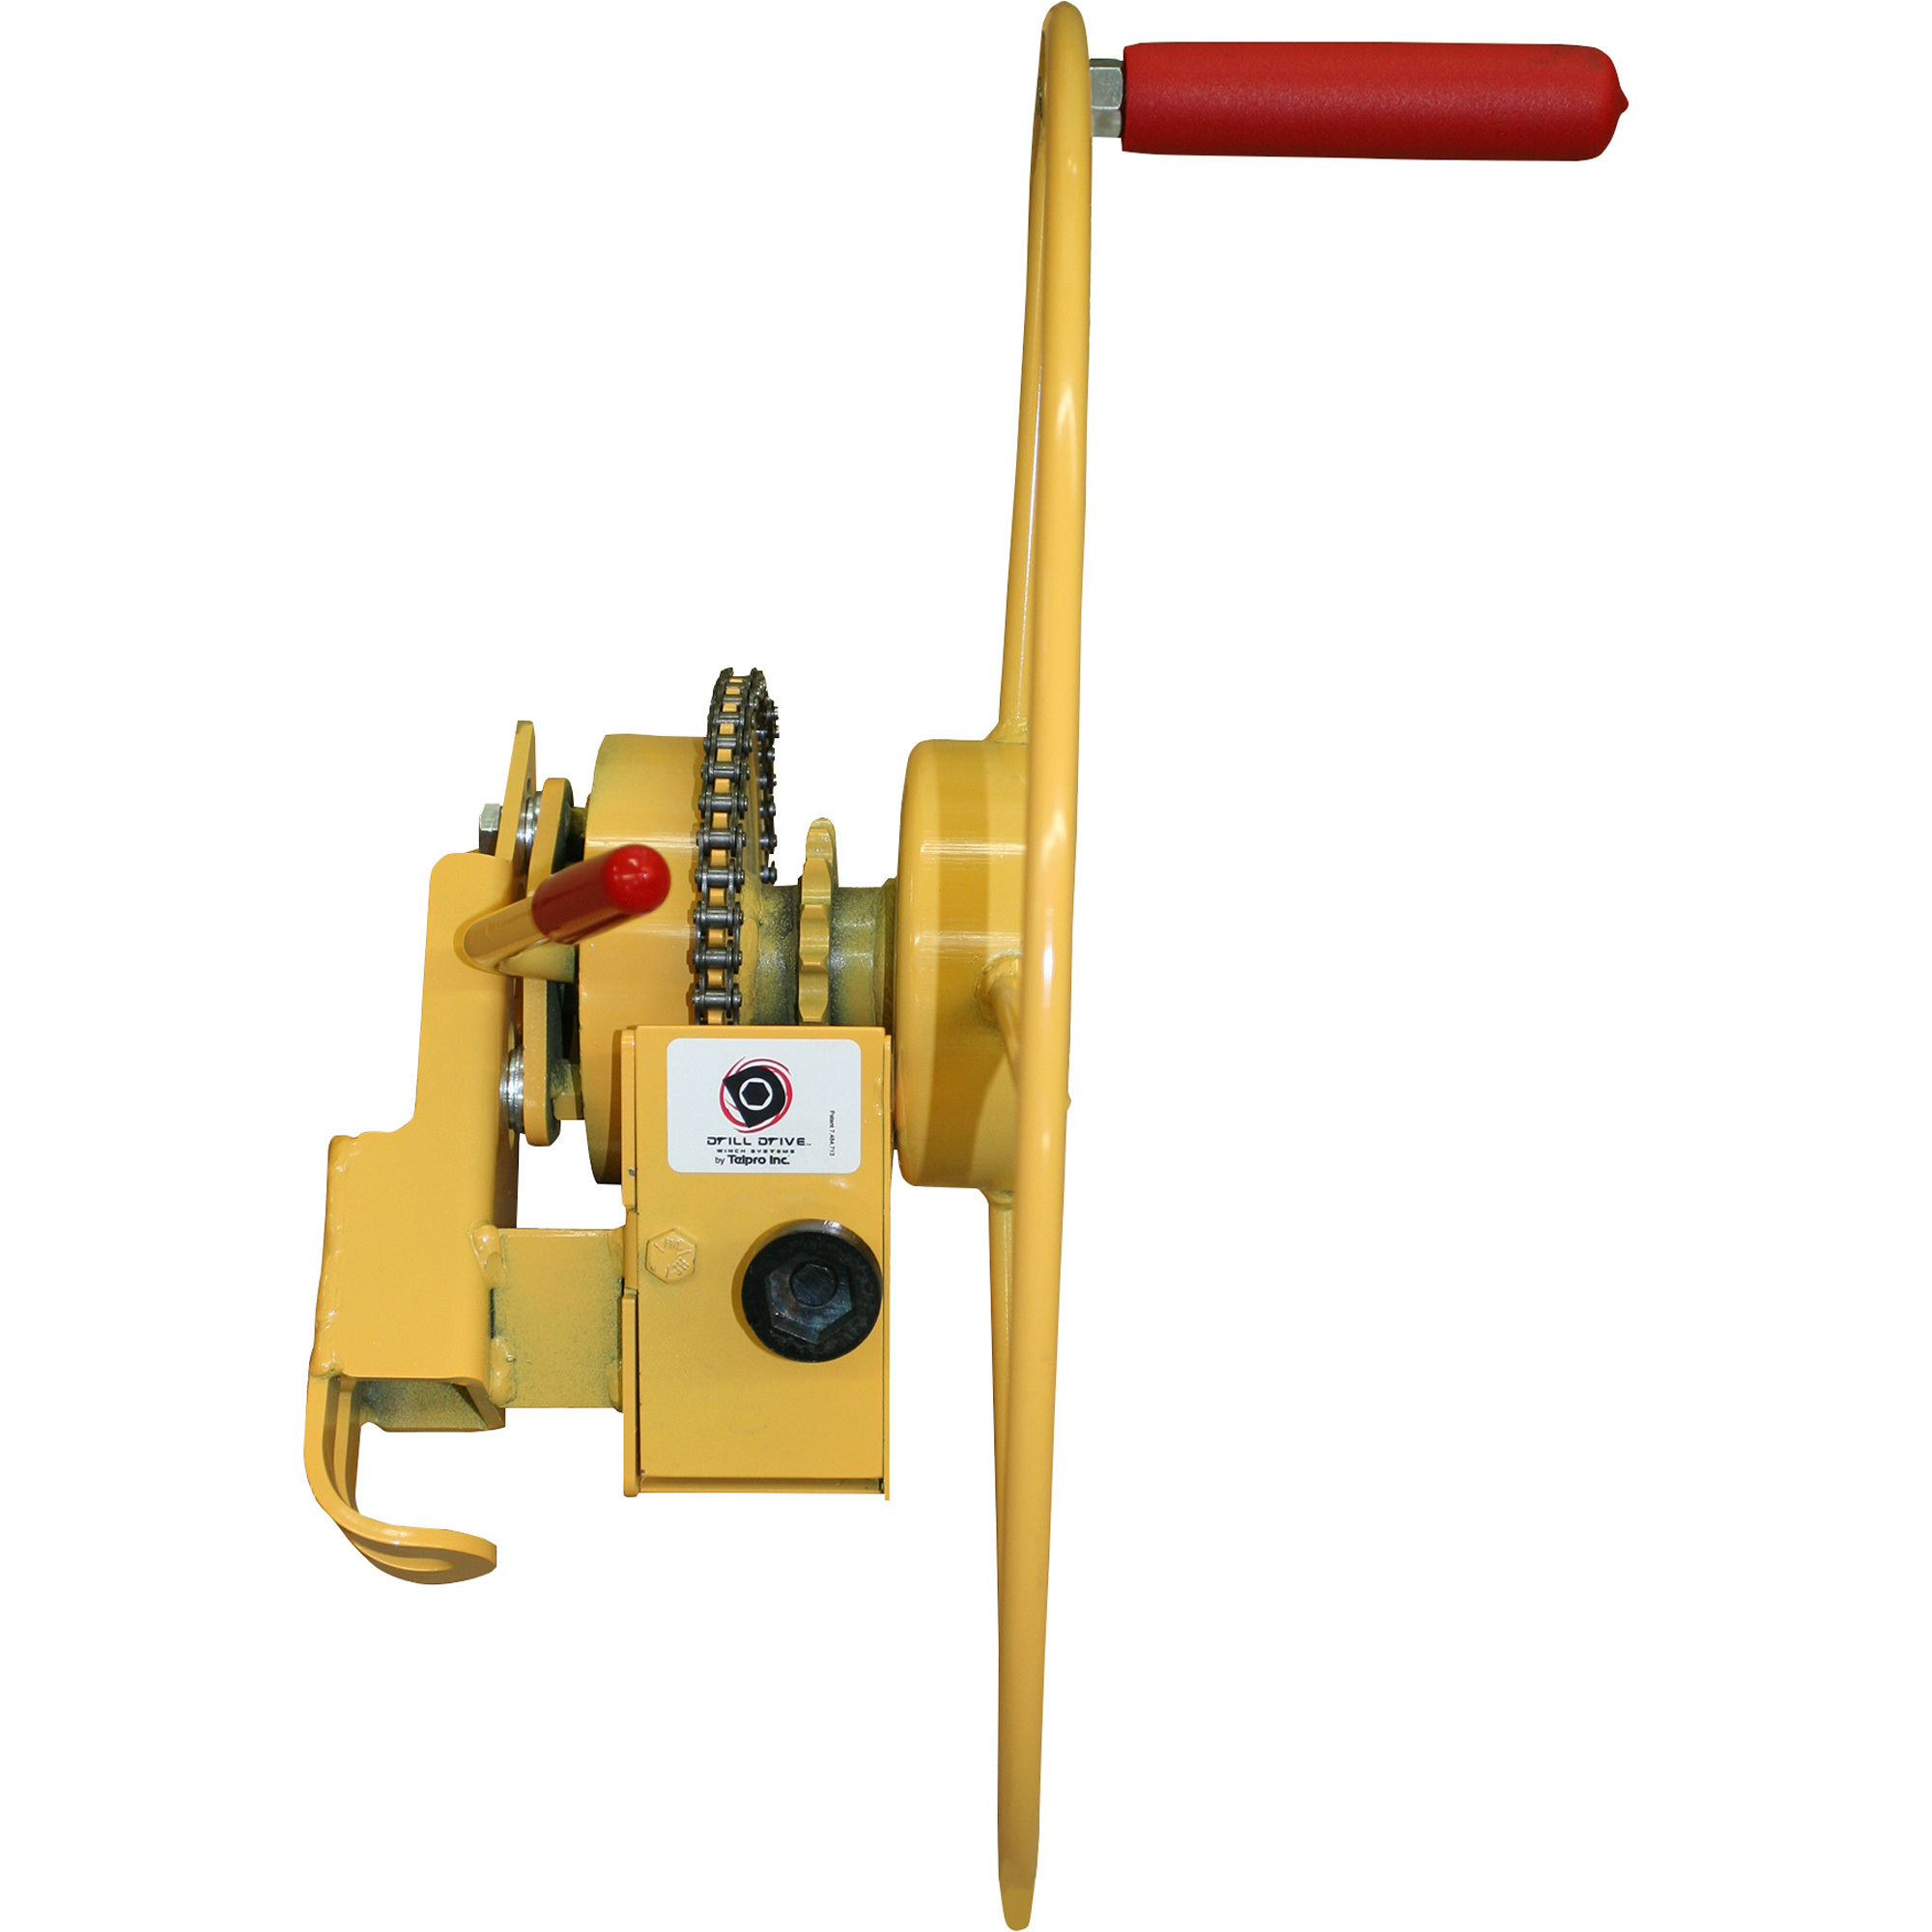 Panellift Drill Drive Winch Assembly for Panellift Model 439 â 18Inch L x 10Inch W x 10Inch H, Model 1065